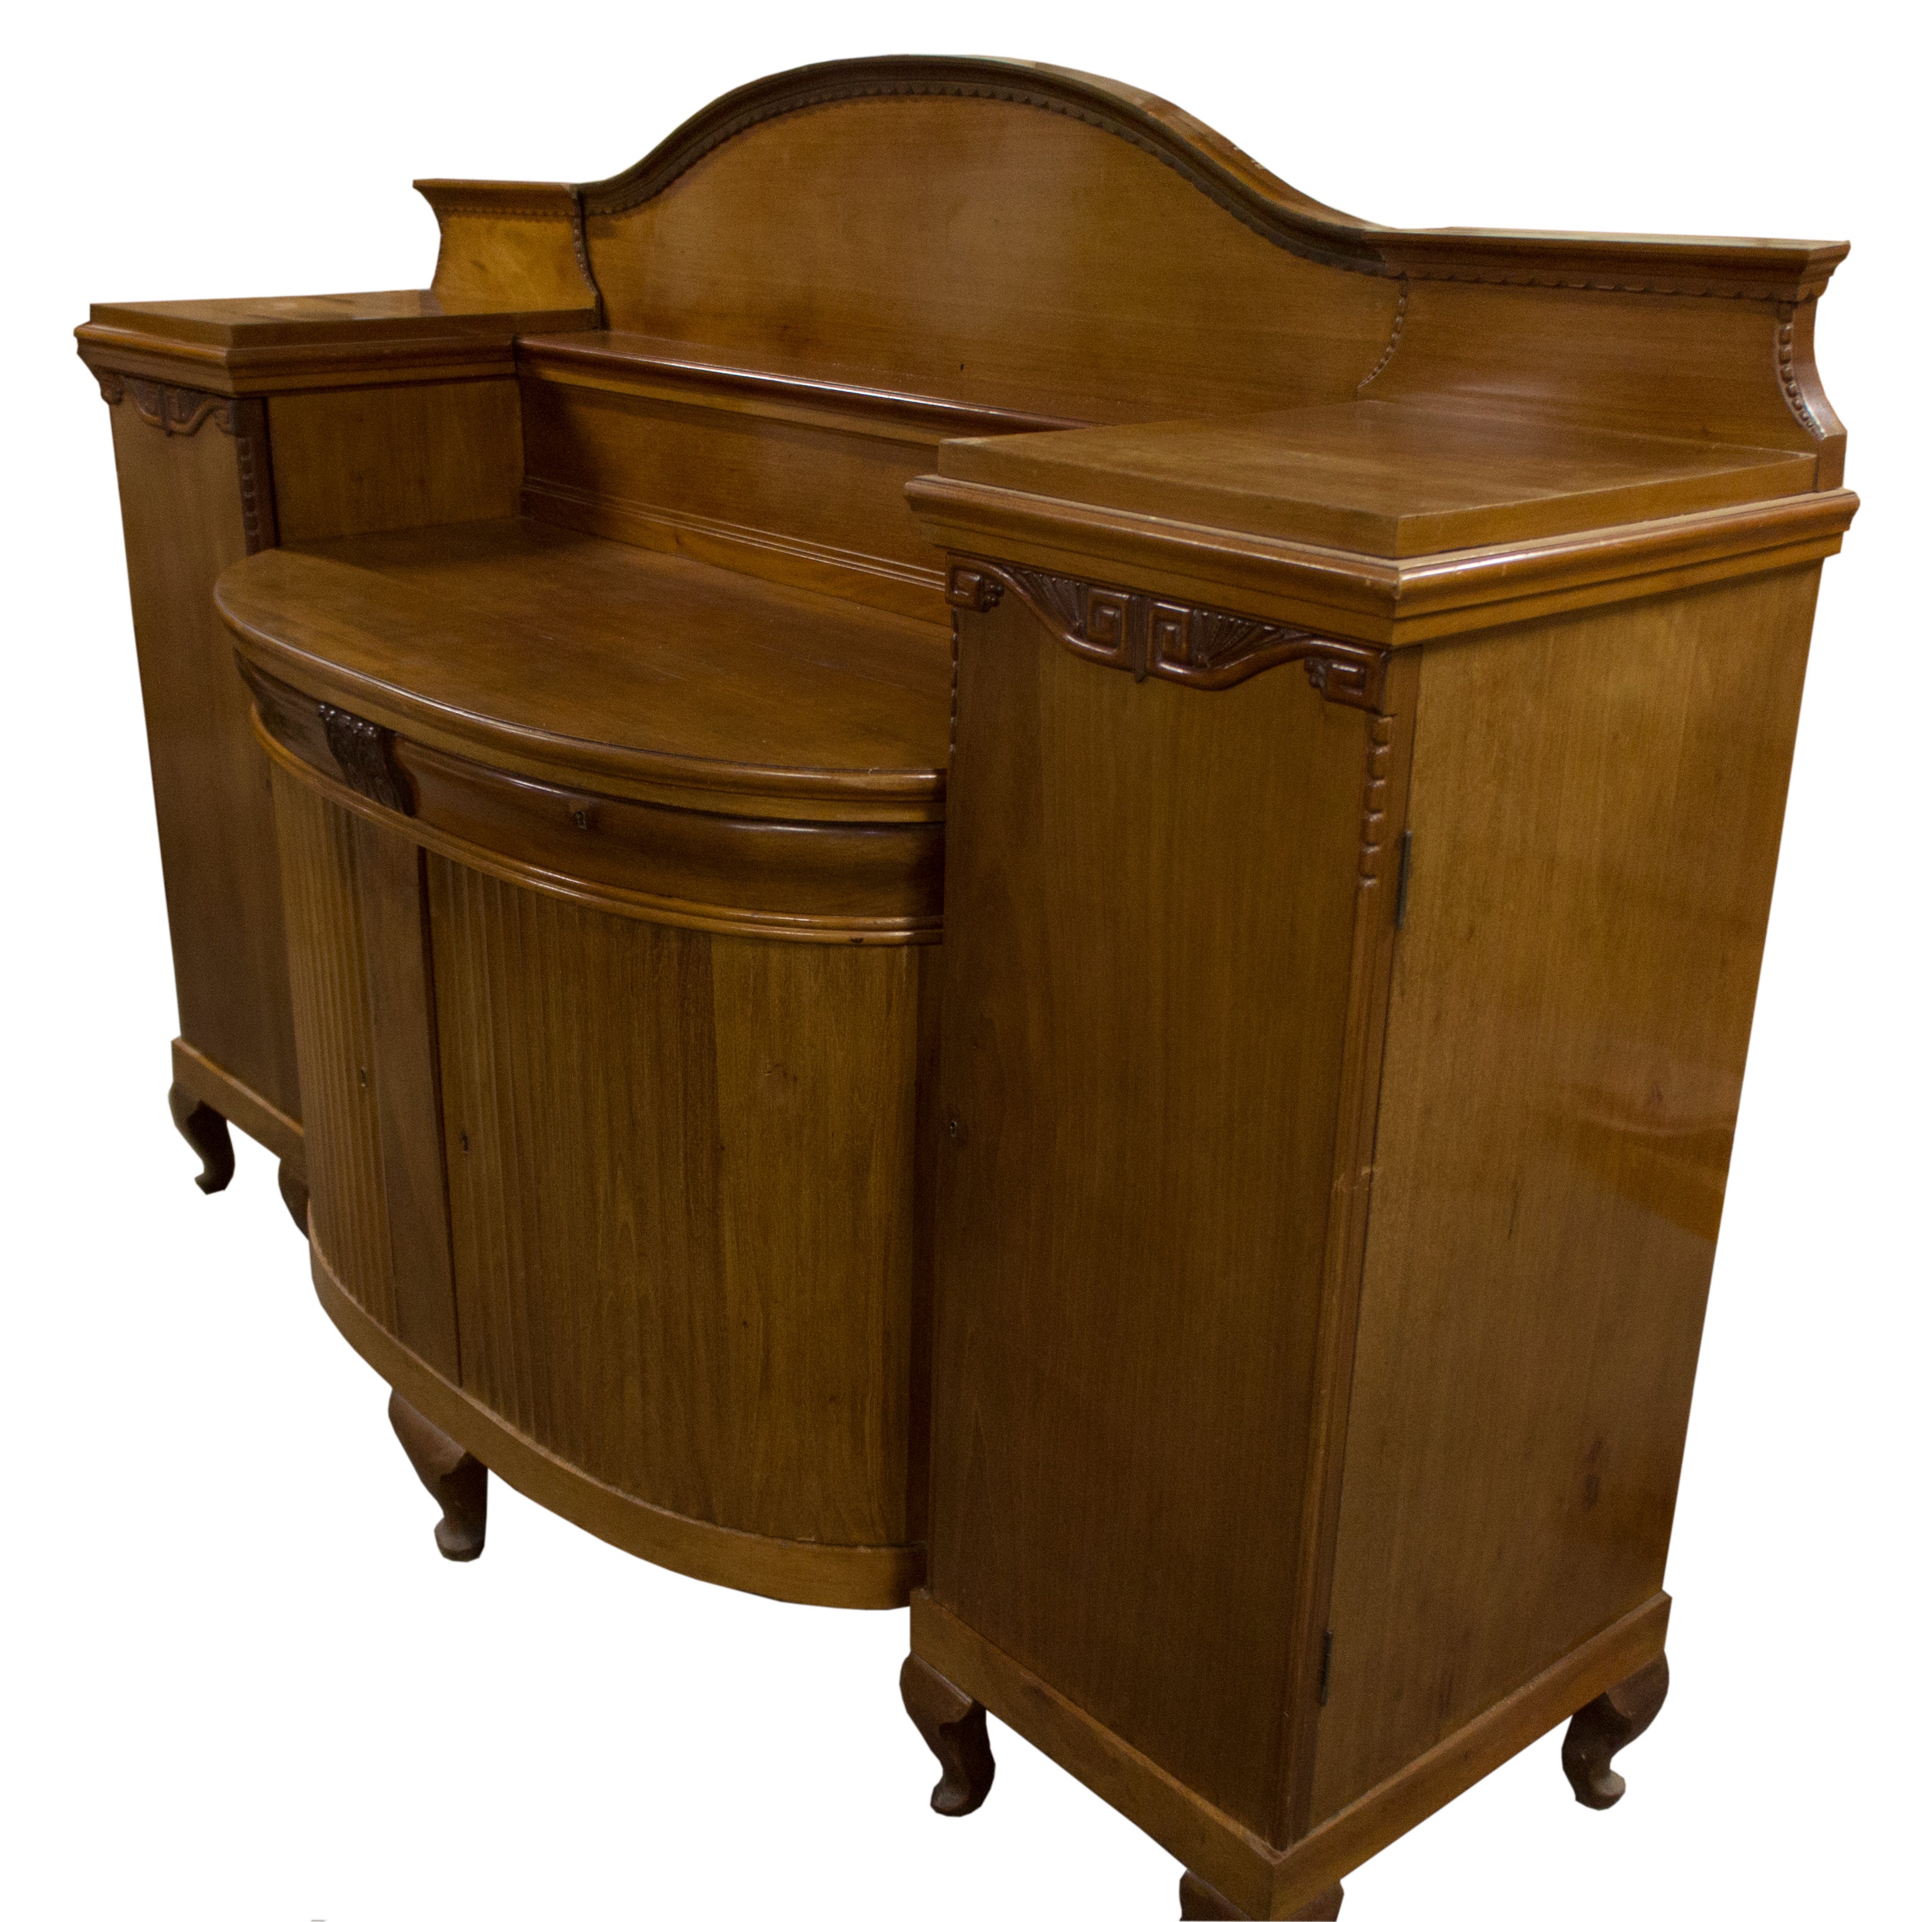 Blonde Mahogany Neoclassical Centerpiece Server For Sale